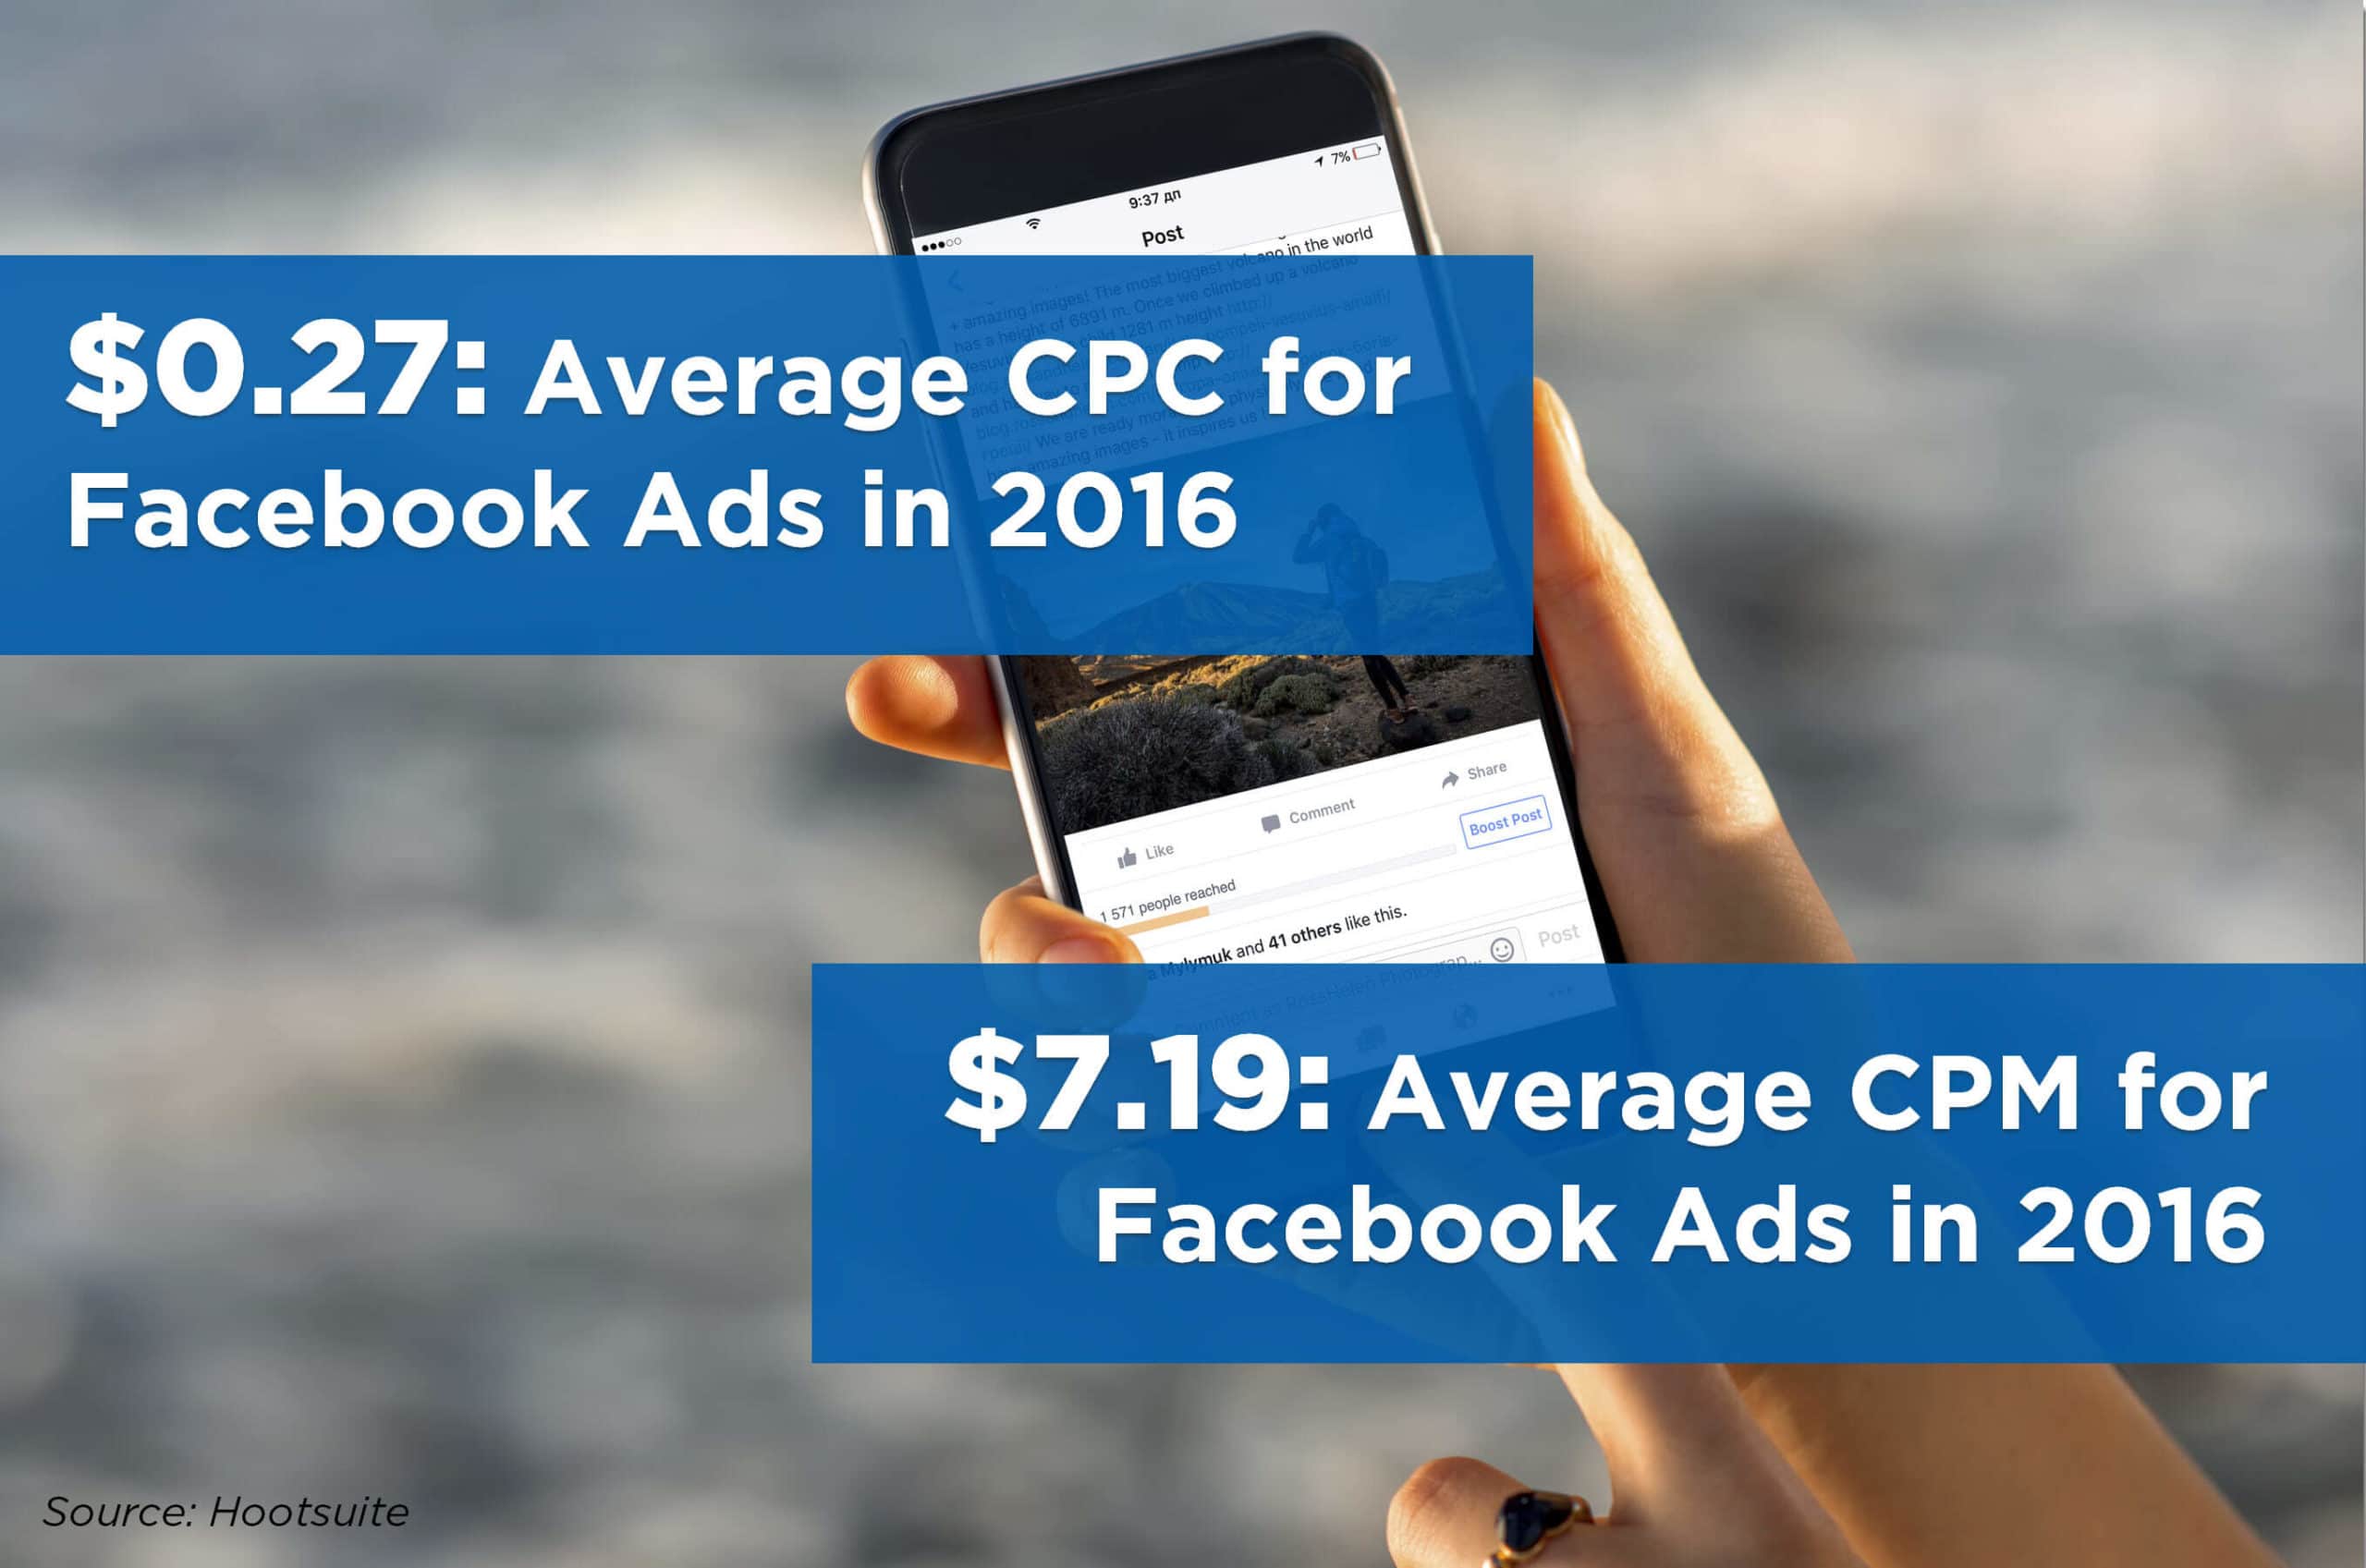 Facebook ads cost about 27 cents per click